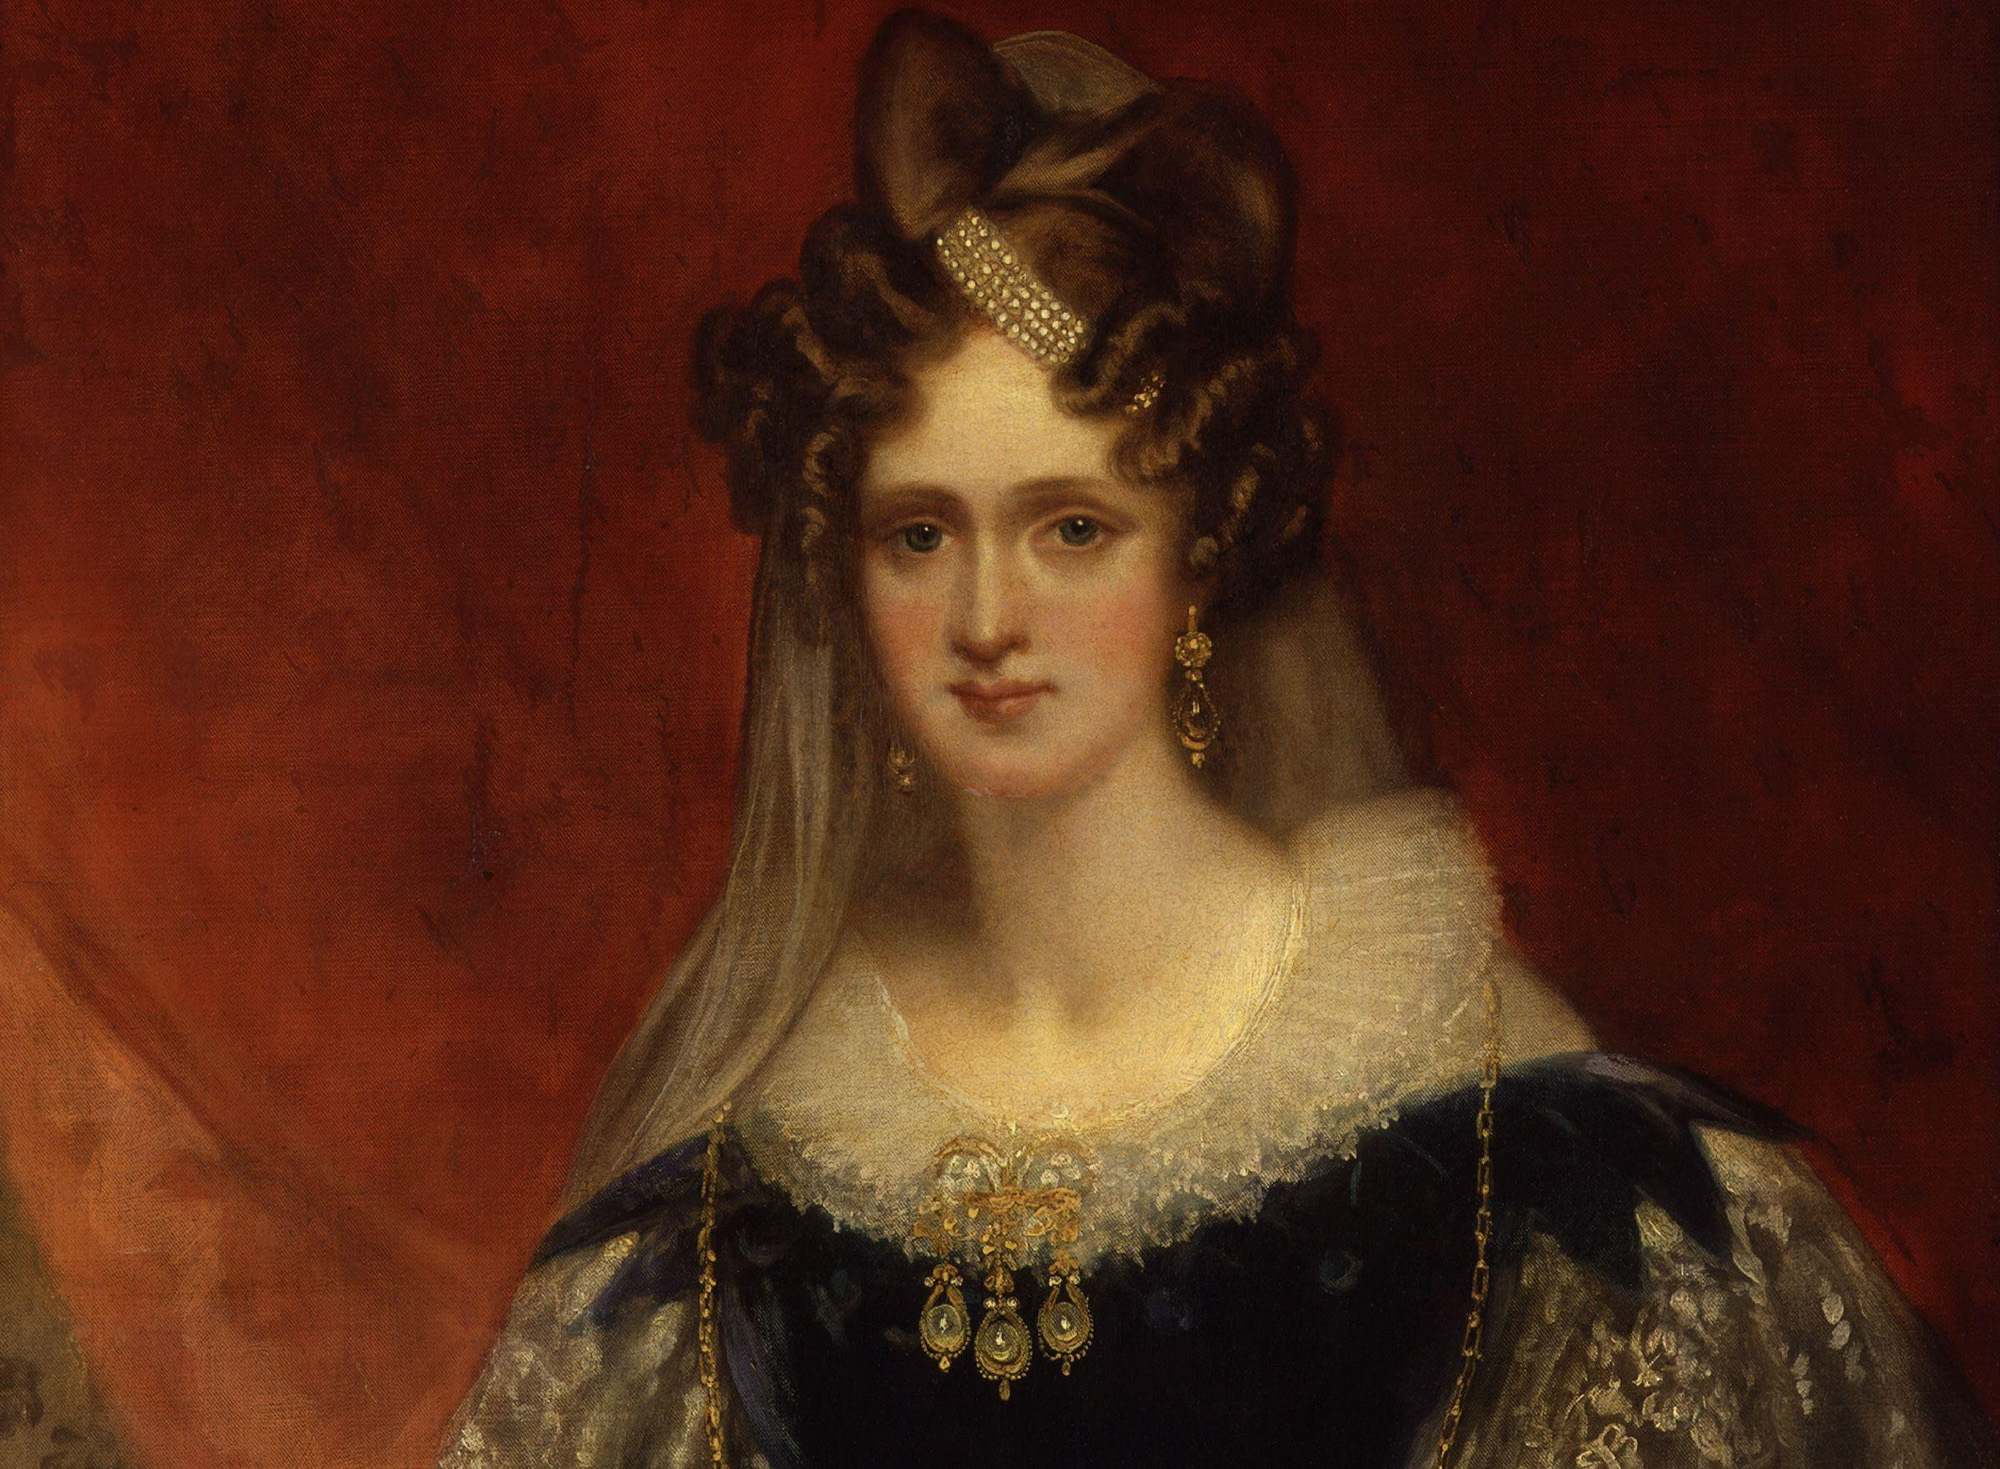 Steadfast Facts About Queen Adelaide, The Tragic Consort